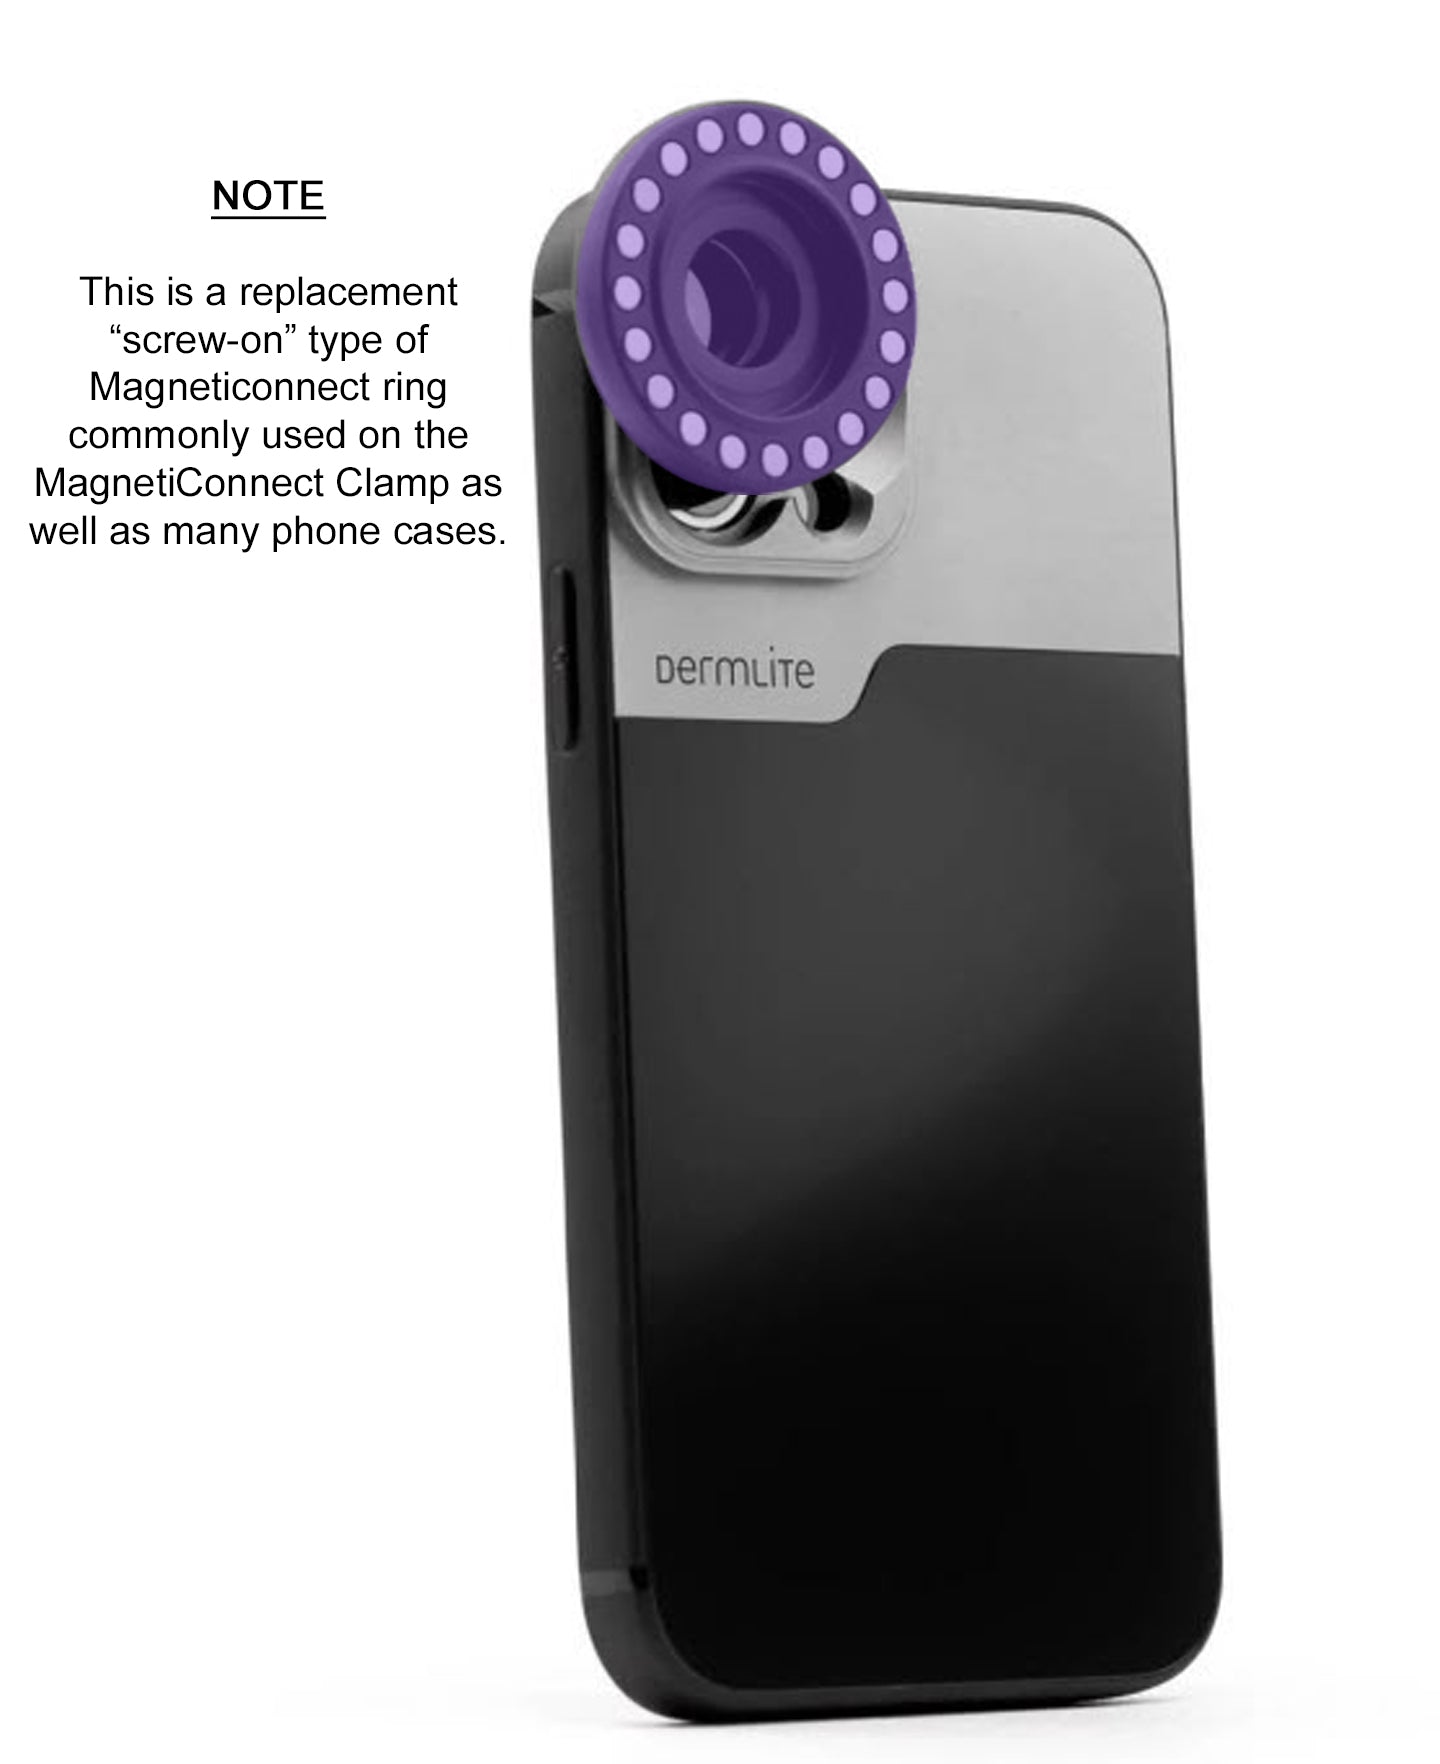 A DermLite MagnetiConnect Ring (Replacement) phone with a purple lens attached to it.